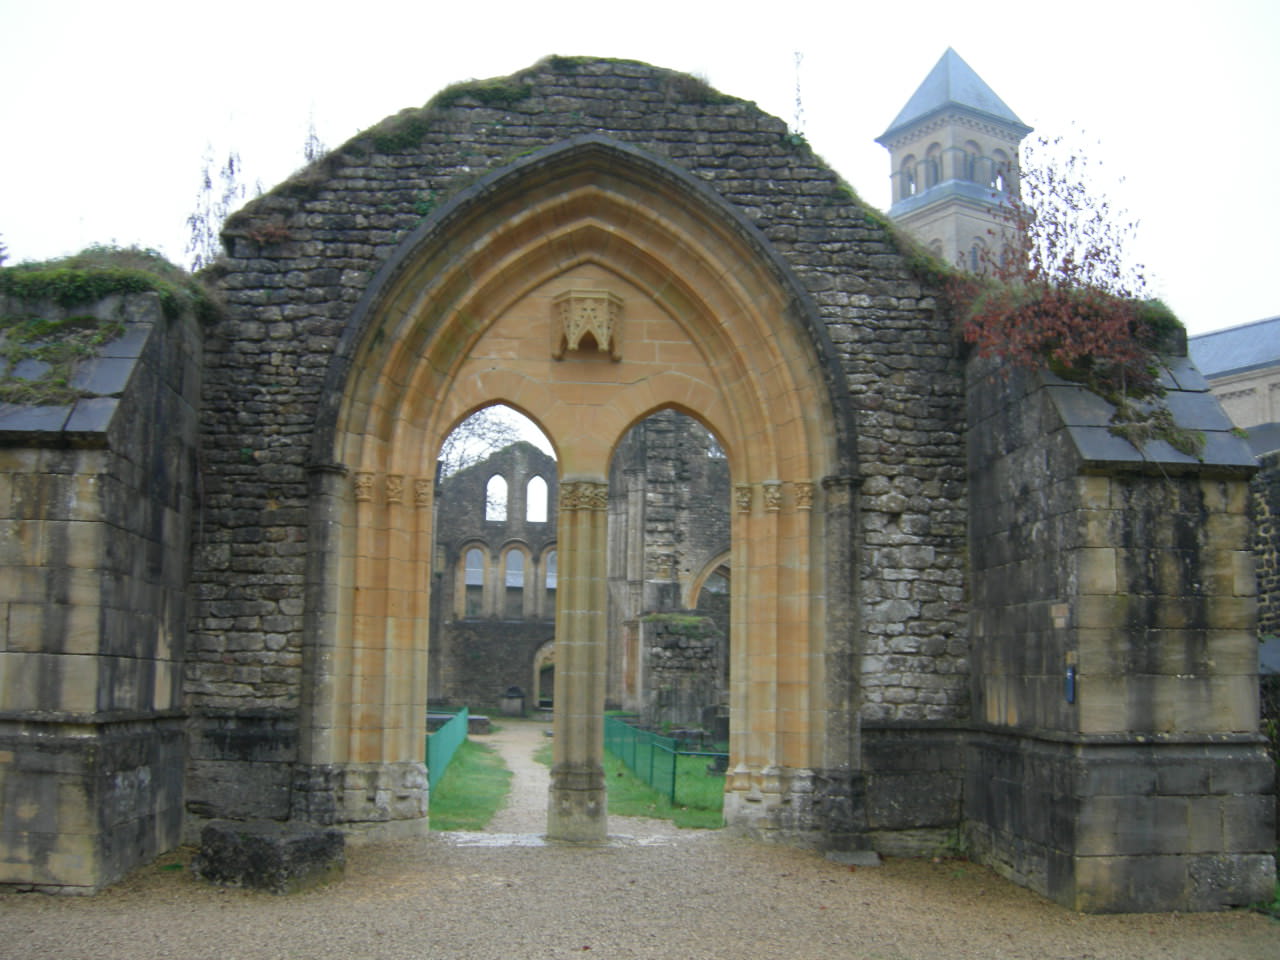 Explore the atmospheric ruins at orval monastery while you're getting your trappist beer